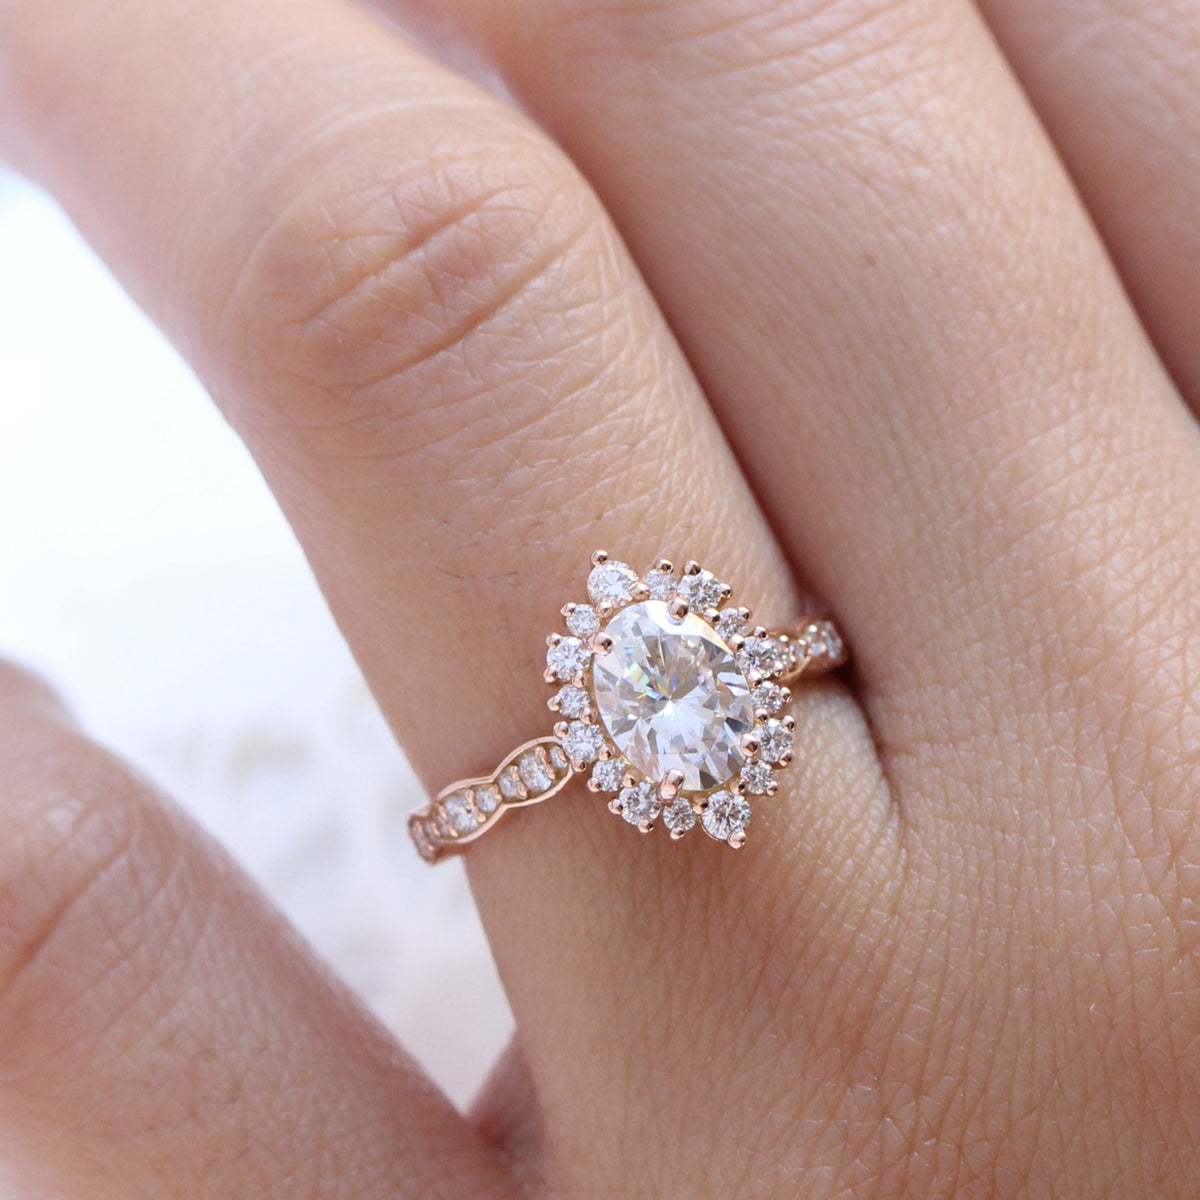 oval moissanite engagement ring rose gold in halo diamond cluster band by la more design jewelry